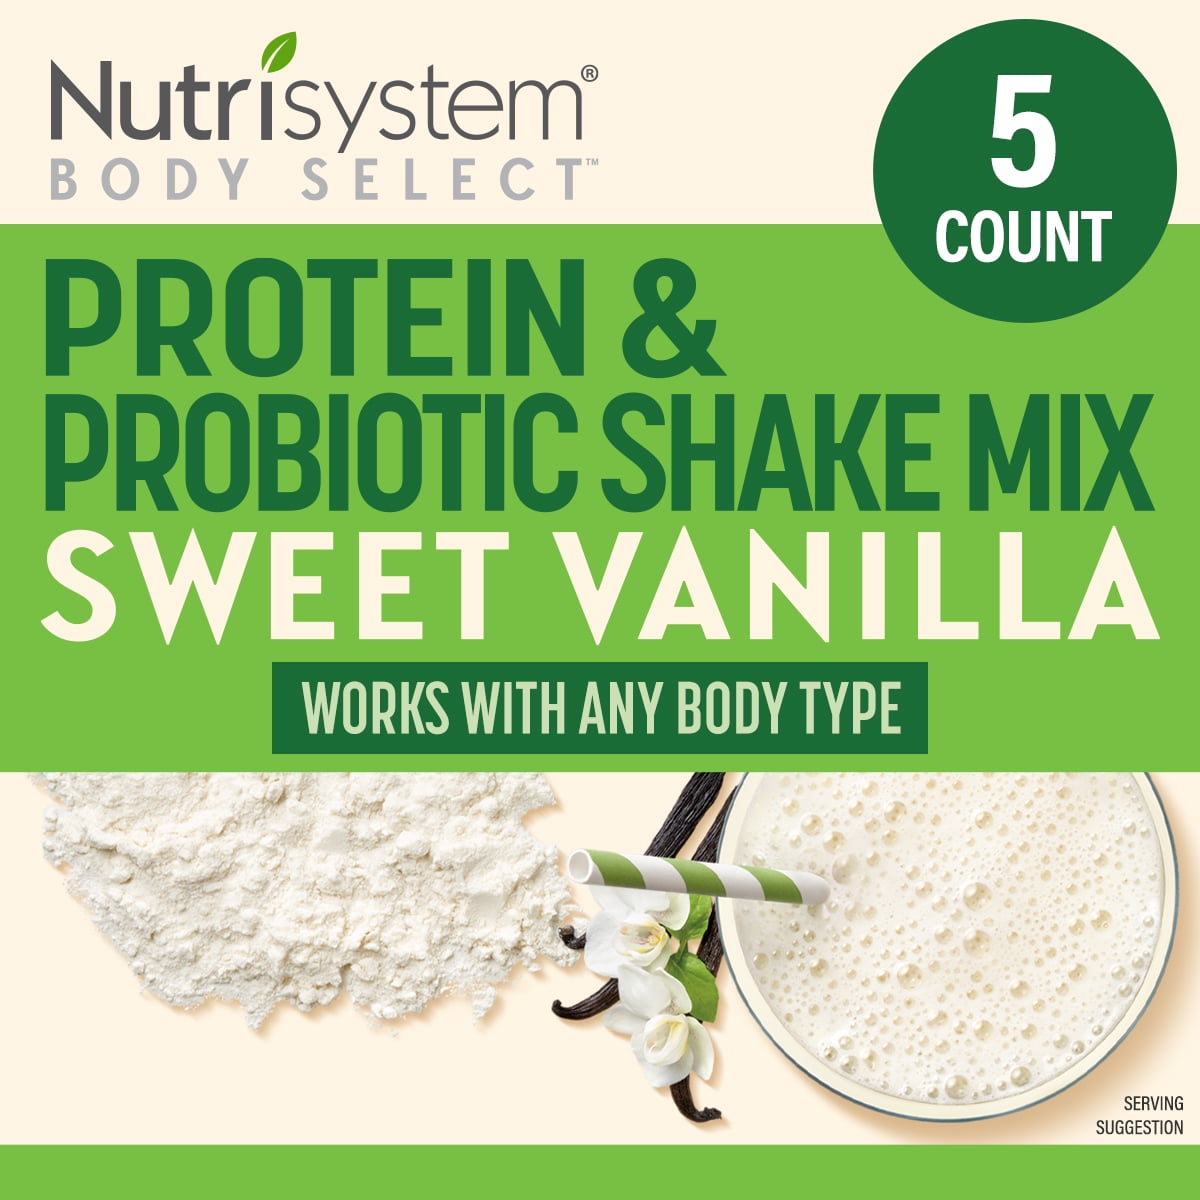 Nutrisystem Prosync Meal Replacement Protein Powder Shake Mix, Chocolate  Fudge, 7 Packets